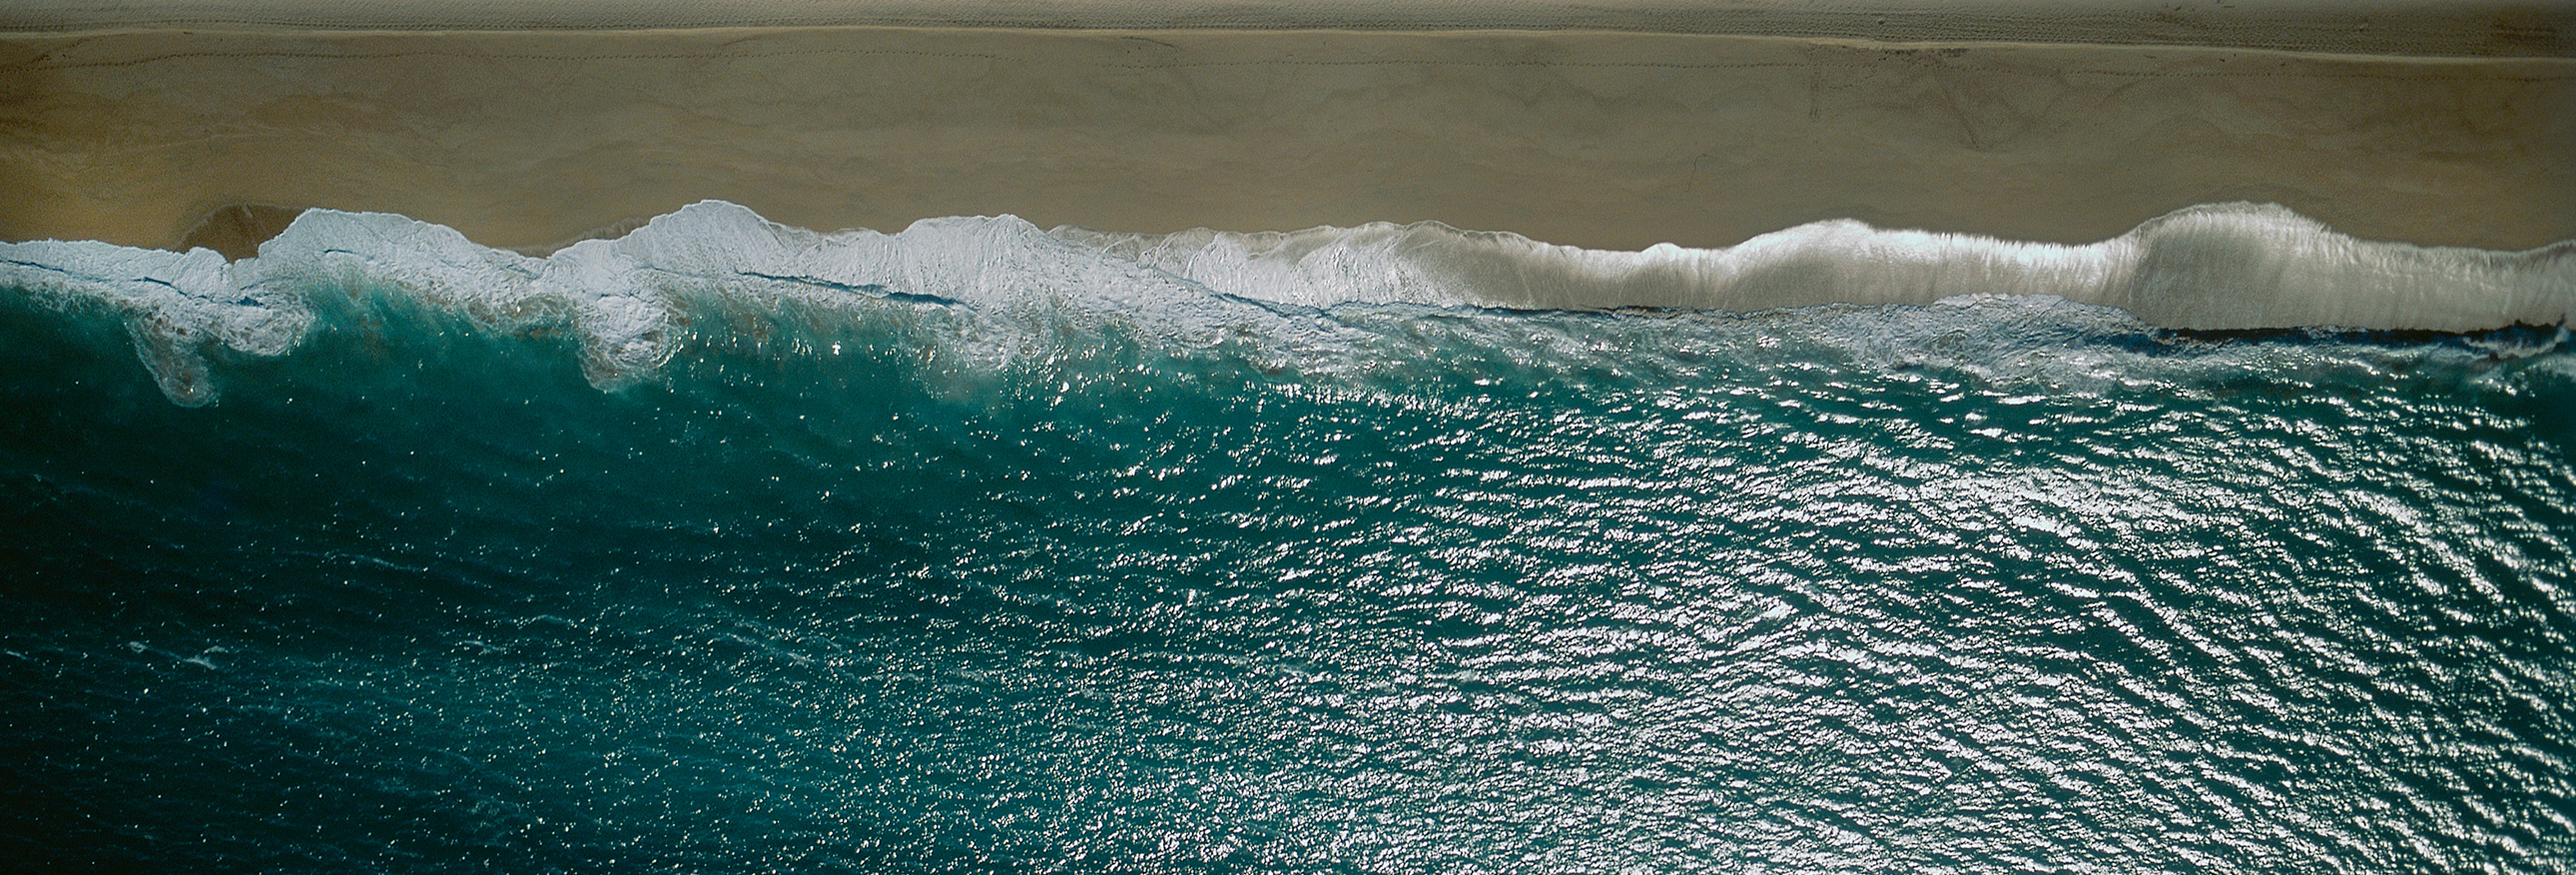 aerial view of a wave crashing on beach